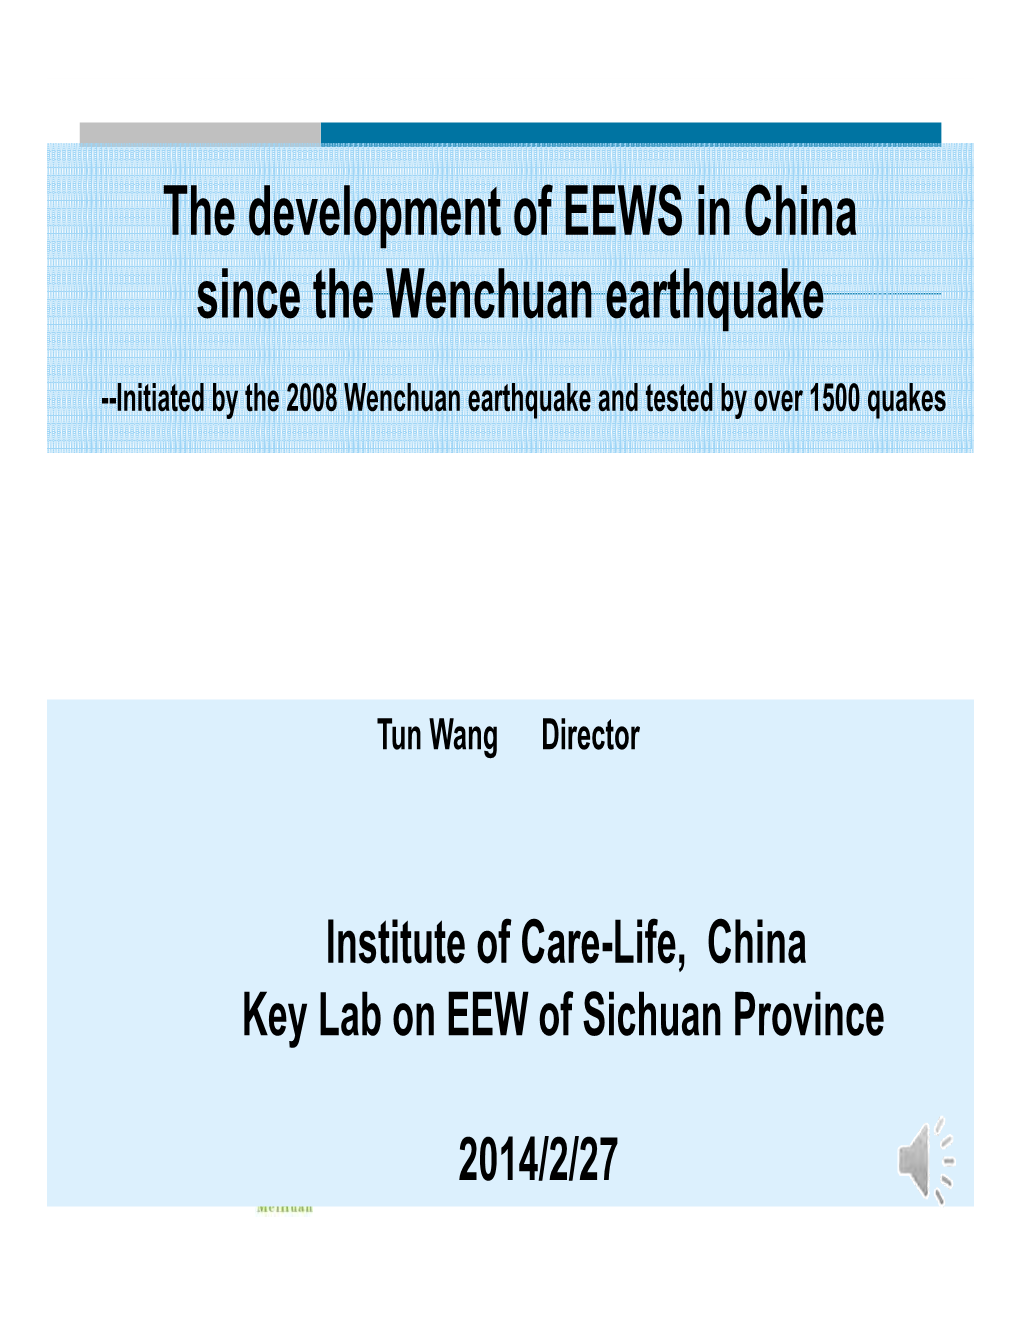 The Development of EEWS in China Since the Wenchuan Earthquake